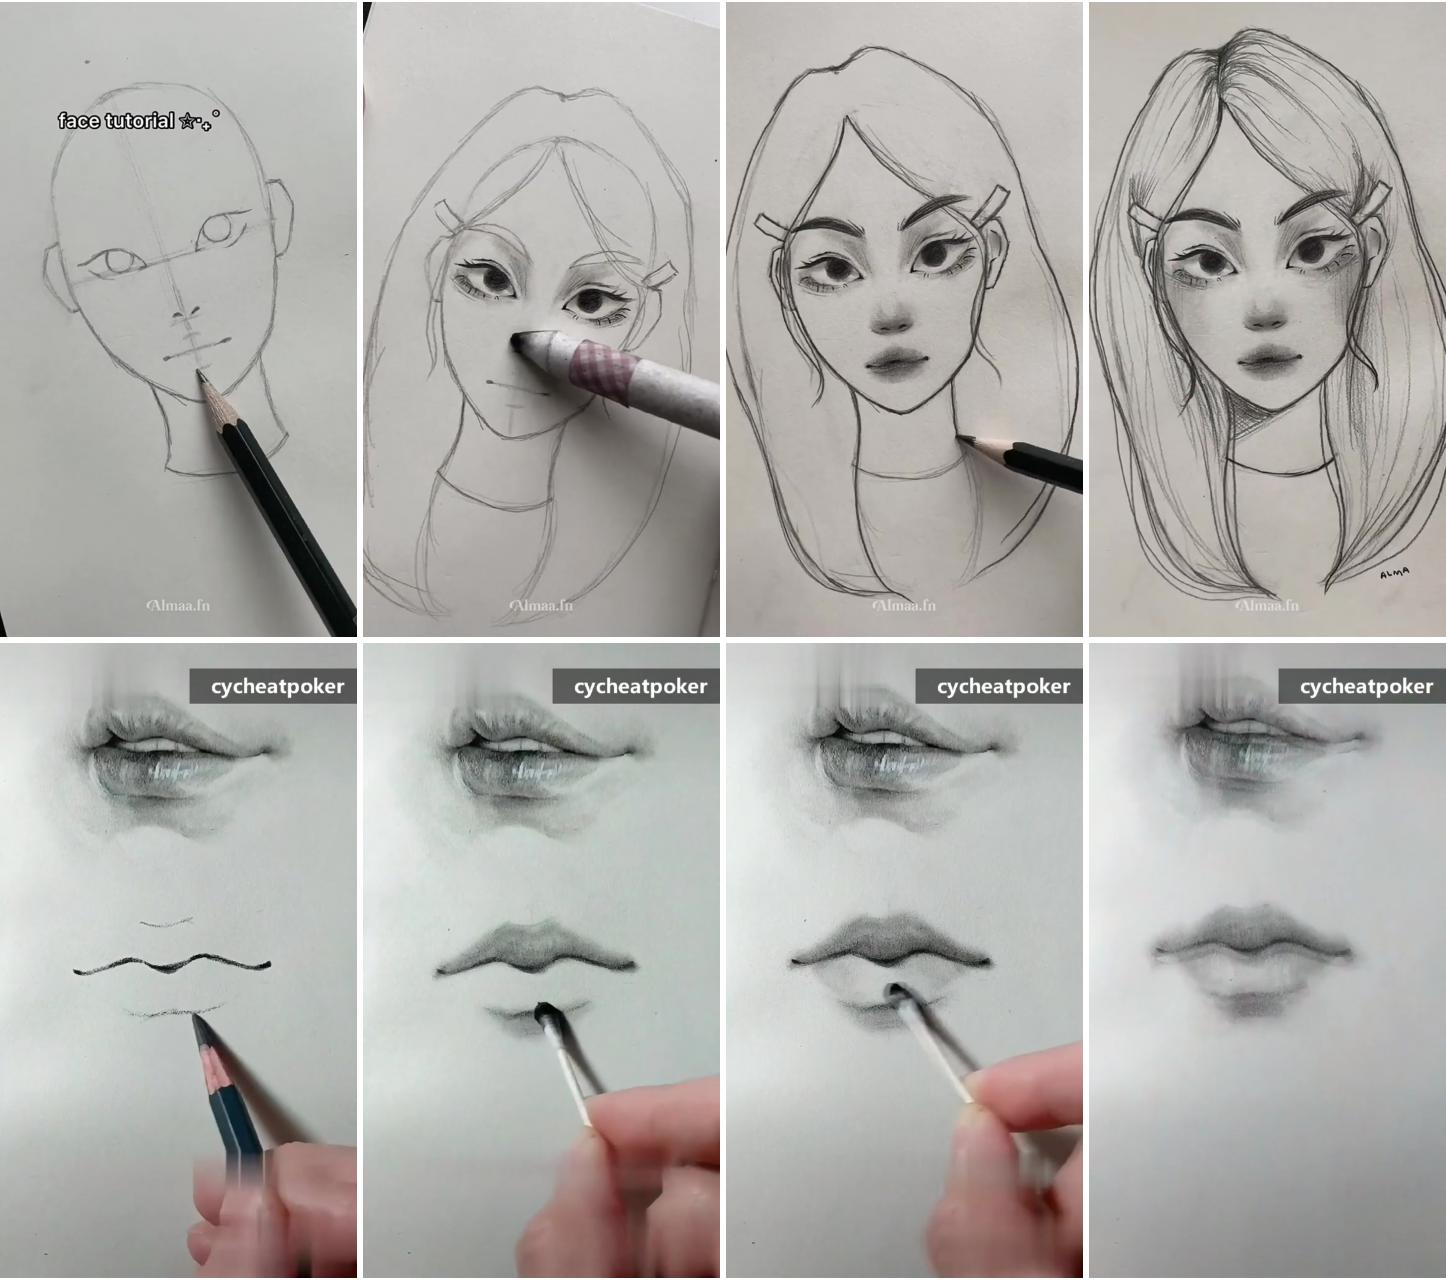 Face tutorial learn to draw with a pencil artist: almaa. fn | realistic drawing technic, realistic sketching technic, realistic painting technic, lip art technics